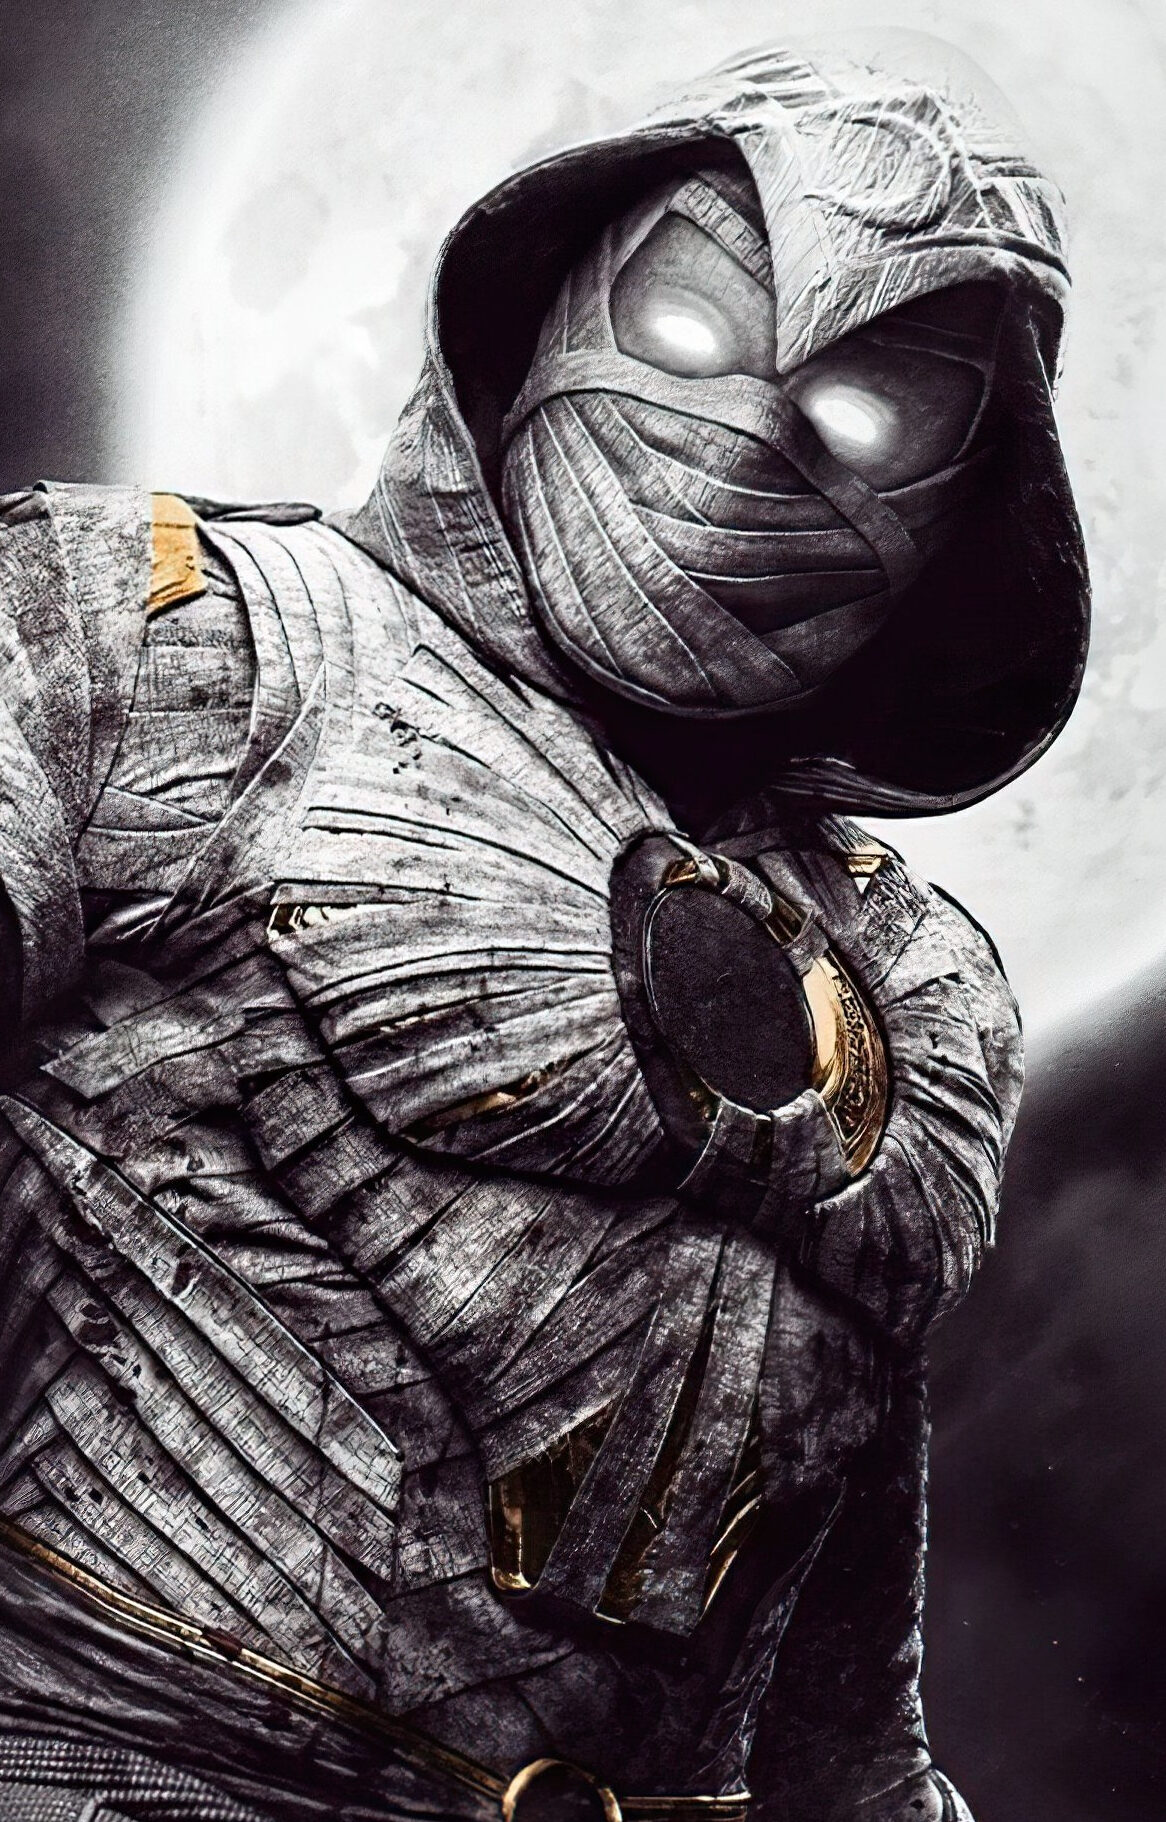 Moon knight 4K HD Wallpaper for Android - Free App Download